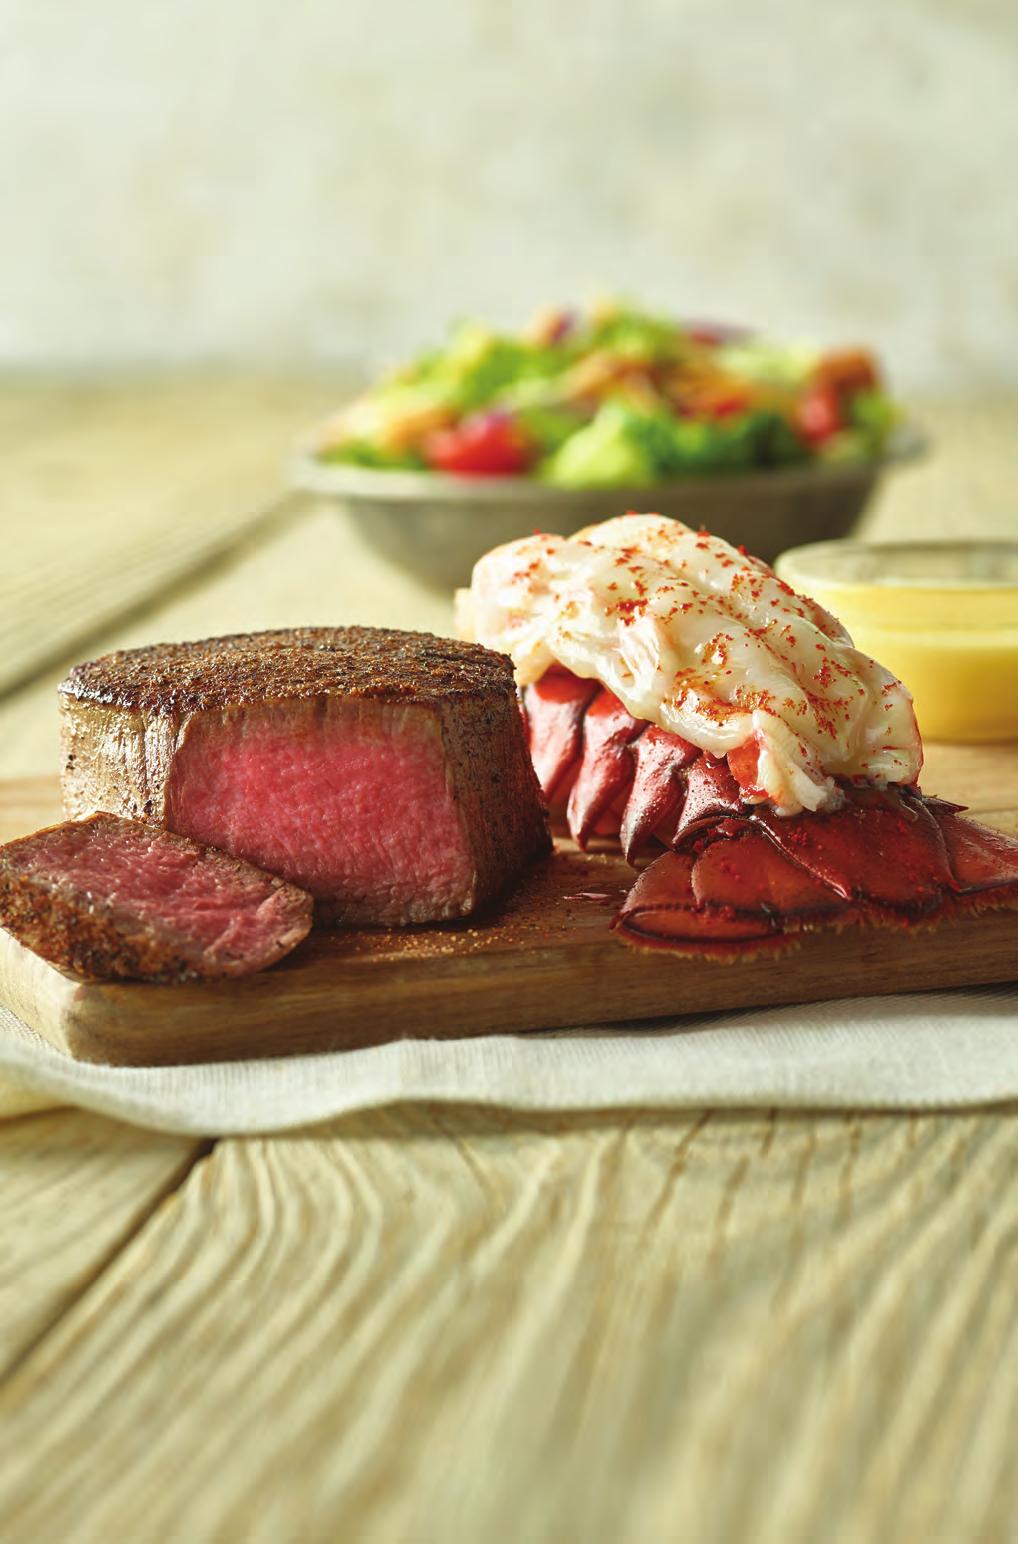 Visit OUTBACK.COM/EXPRESS to place an order online. WE CATER! Call for more details. GET 50% OFF EVERY 4th order! JOIN OUR REWARDS PROGRAM!